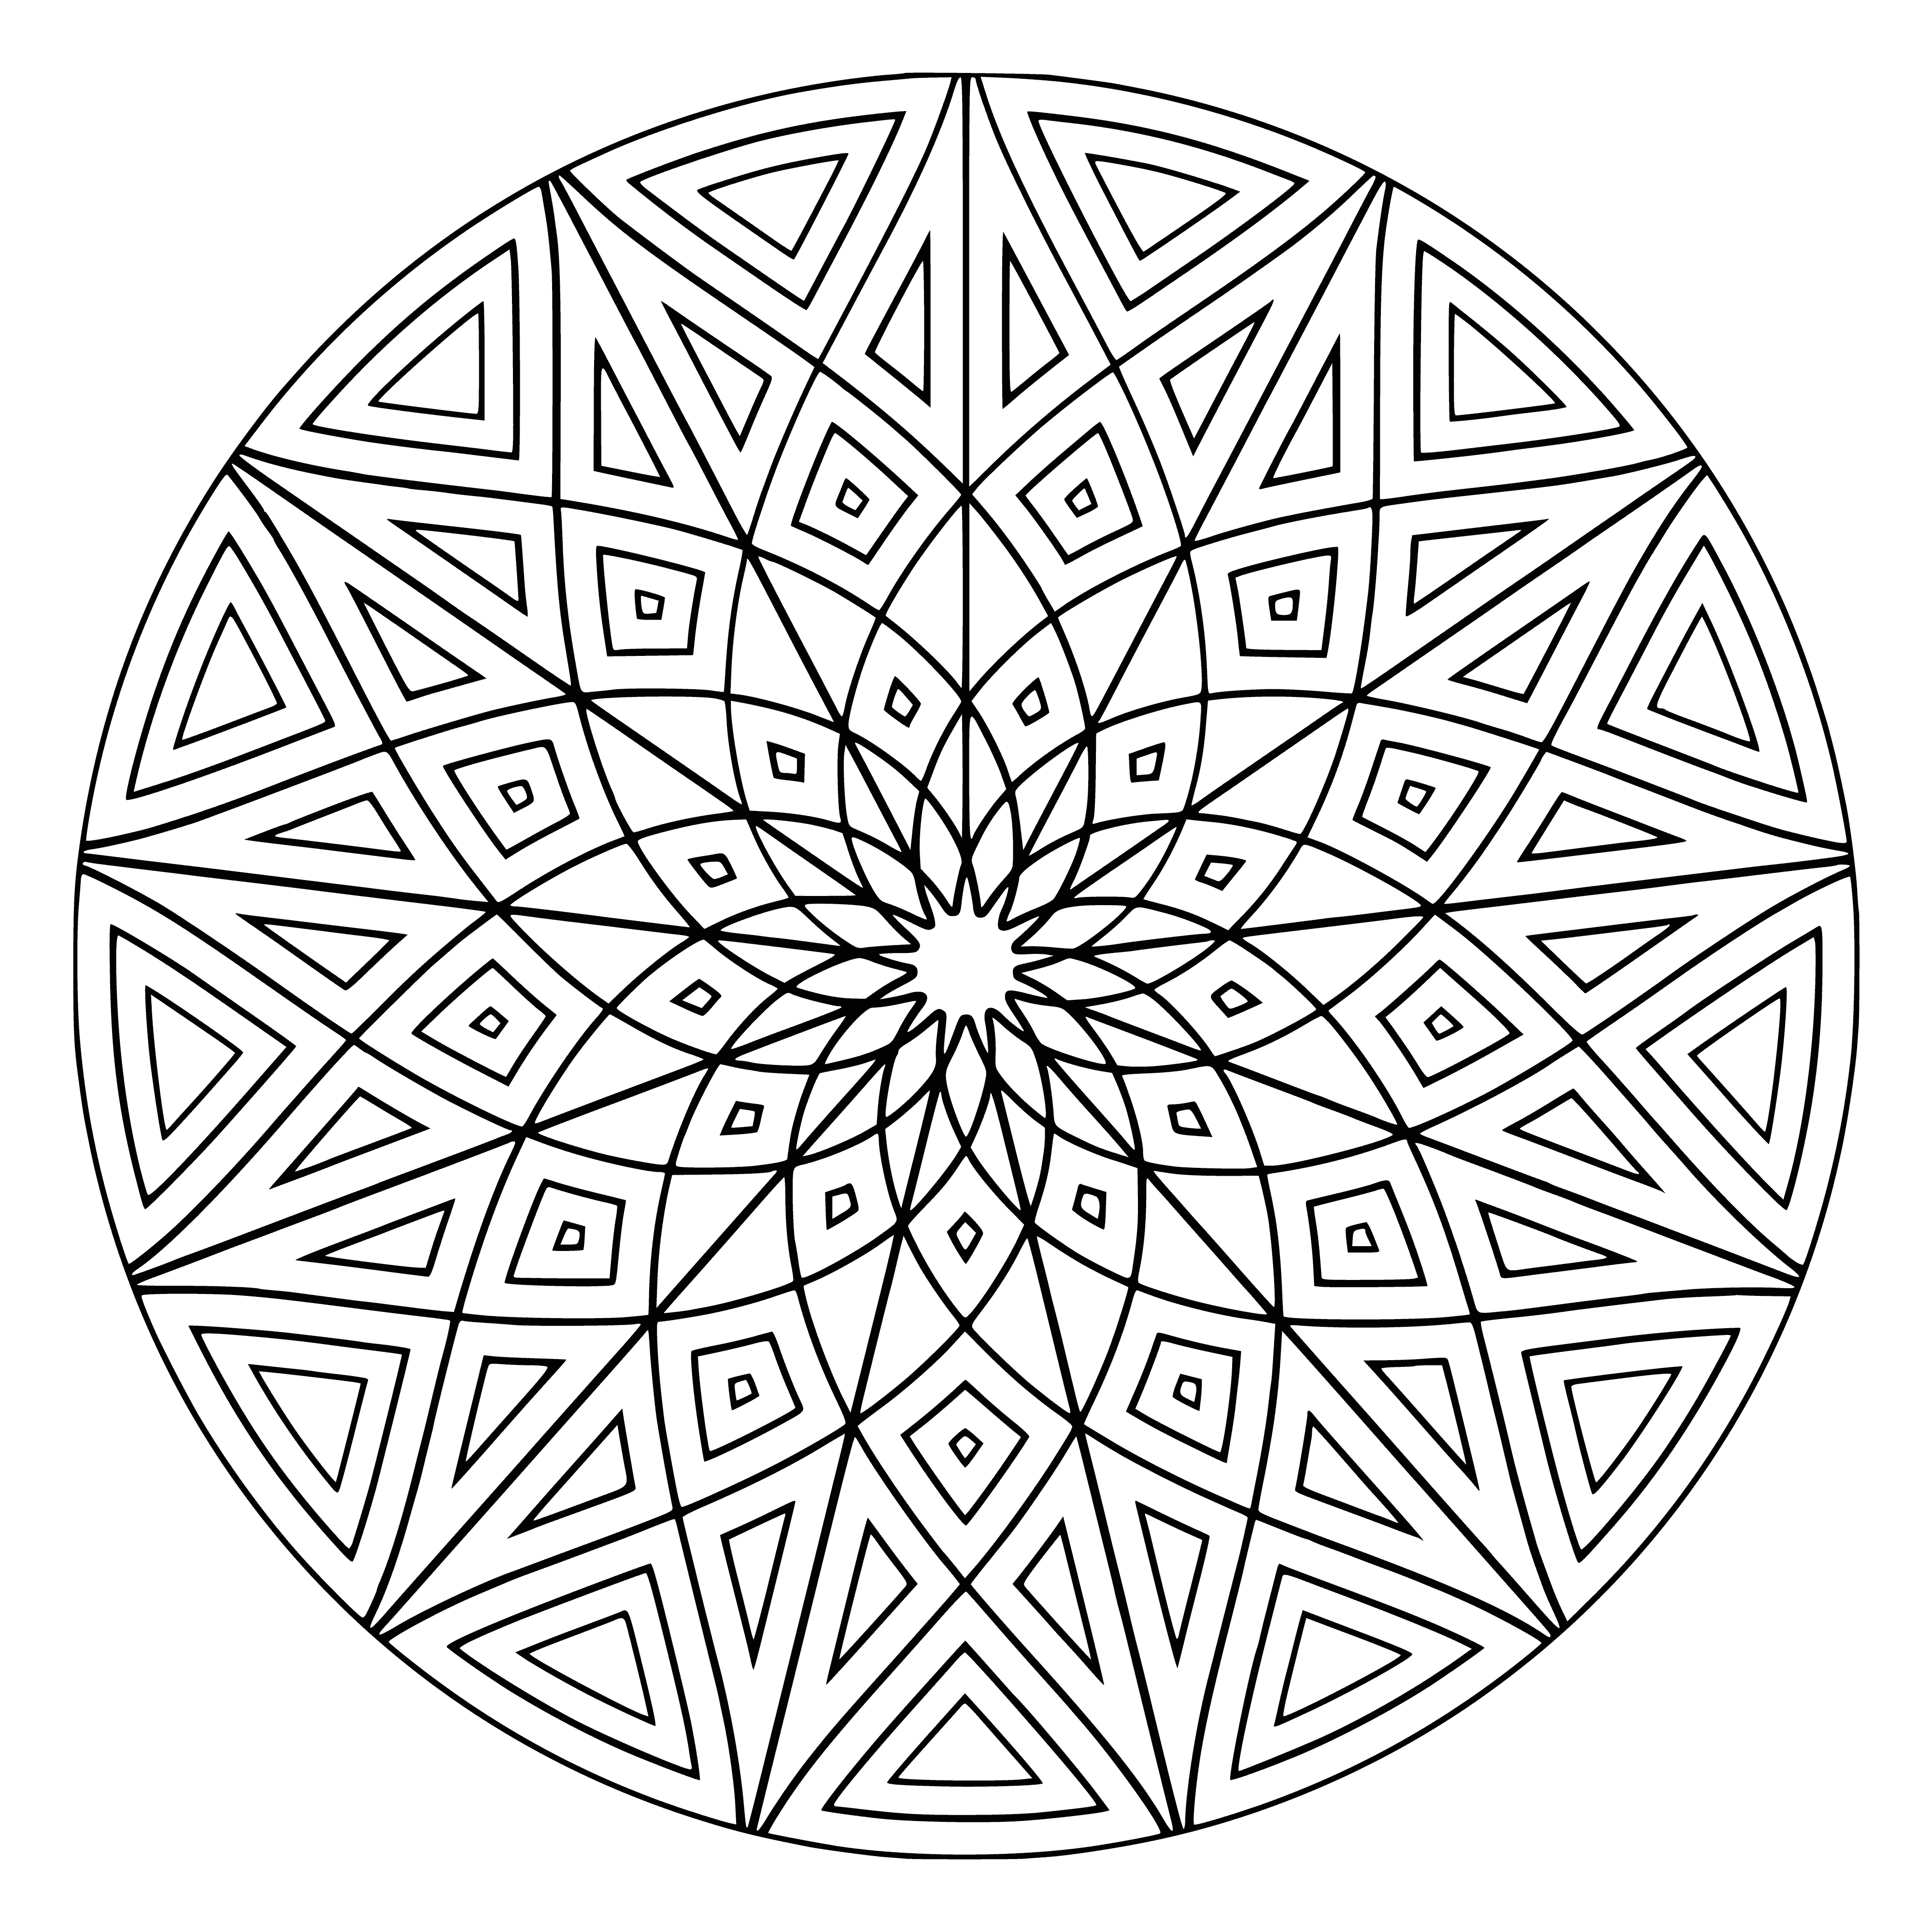 coloring page: Coloring mandala w/ intricate patterns & designs. Many colors & patterns to explore!